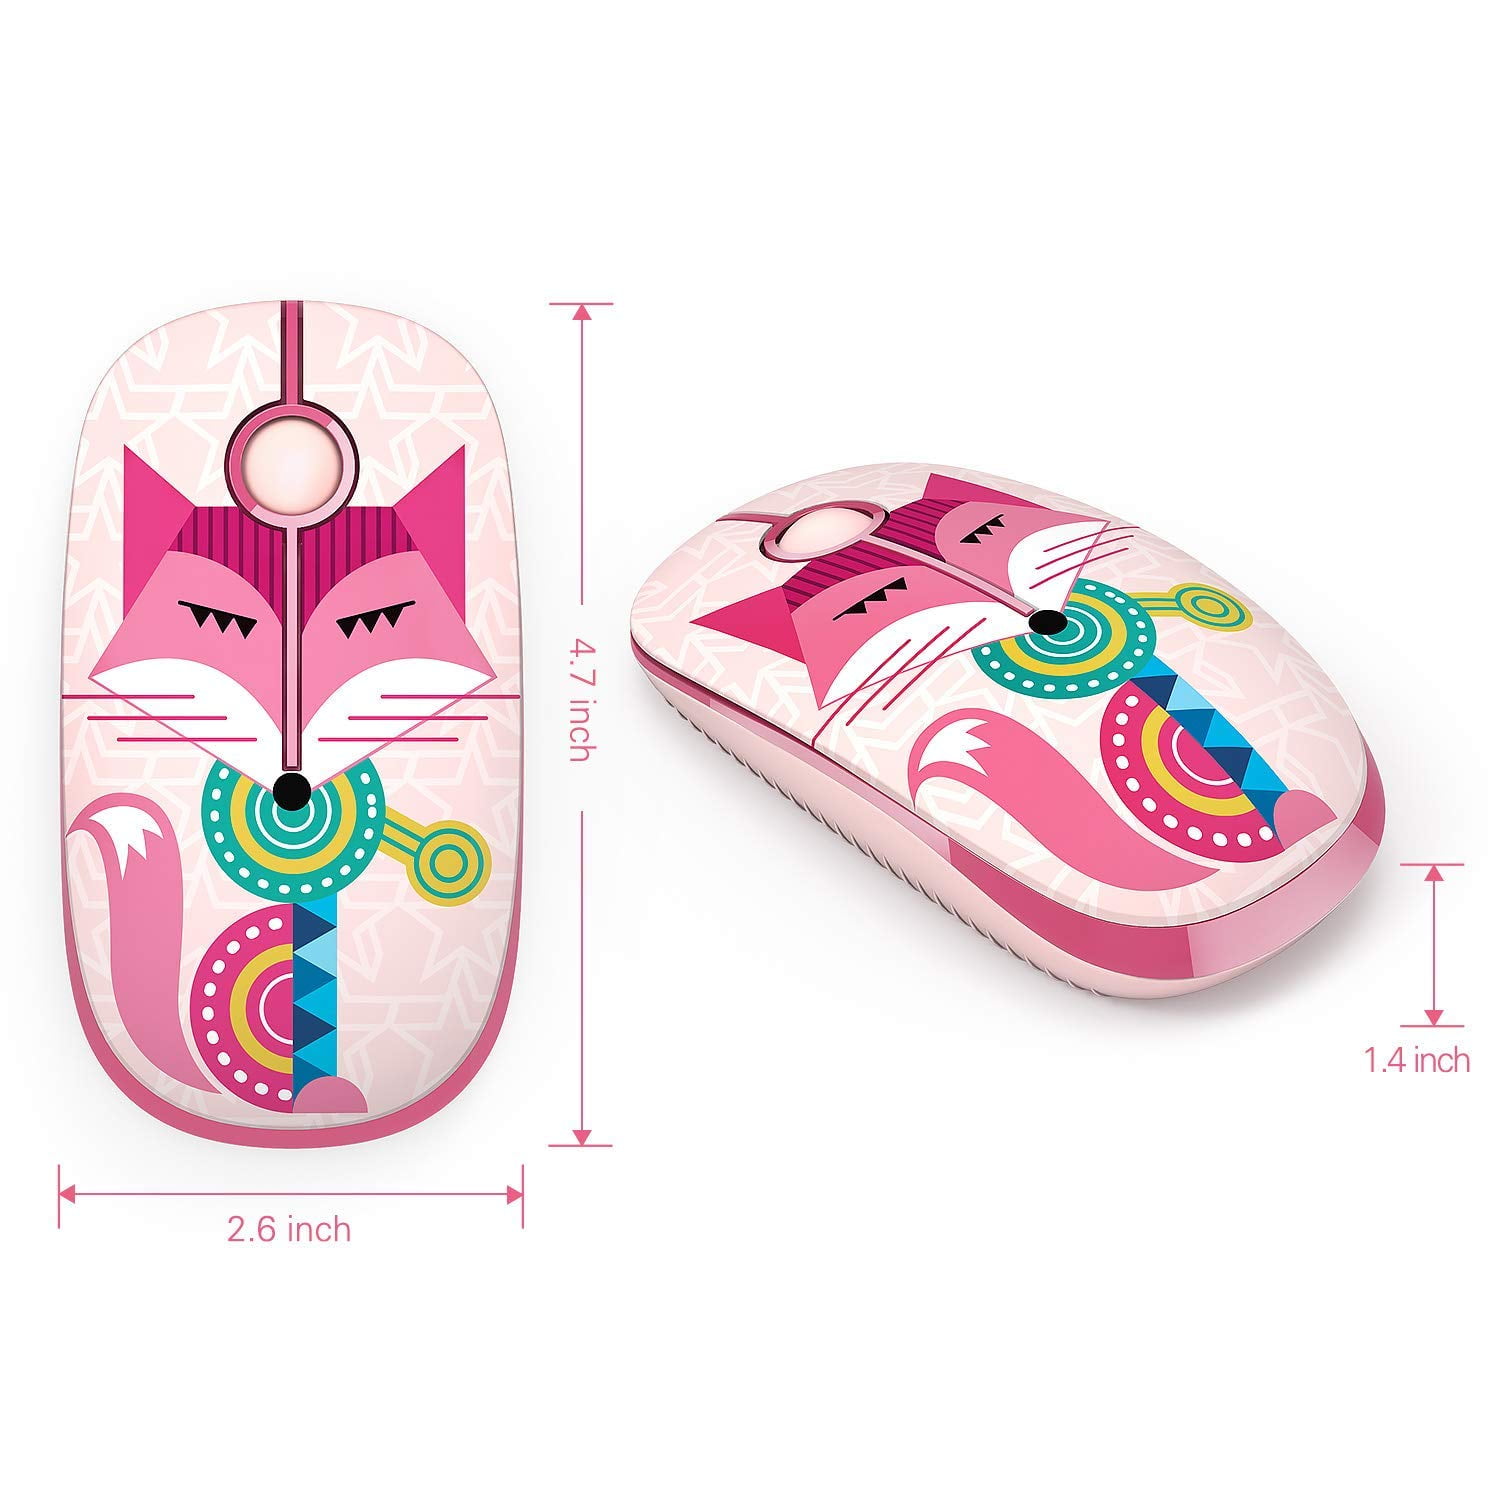 2.4G Wireless Mouse with Cute Pattern Design for All Laptops and Desktops with Nano Receiver Christmas New Year